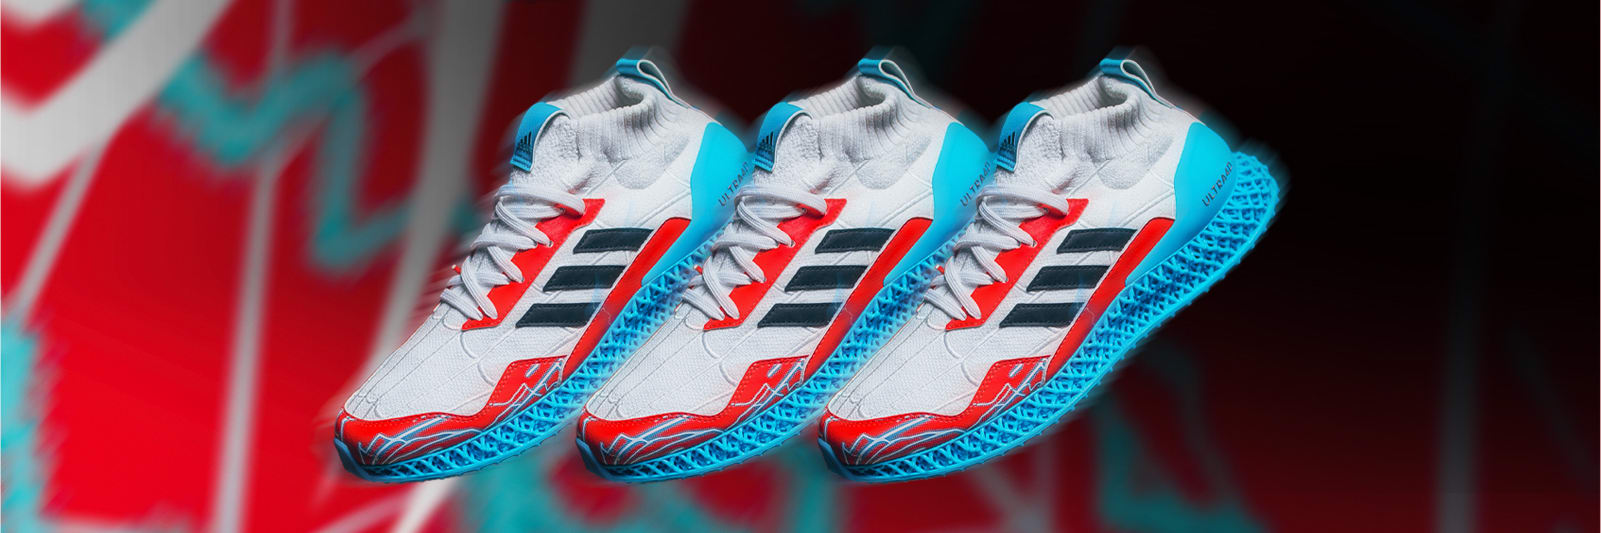 Marvel's Spider-Man 2 adidas Collab: Where Gaming Meets Real-World Fashion